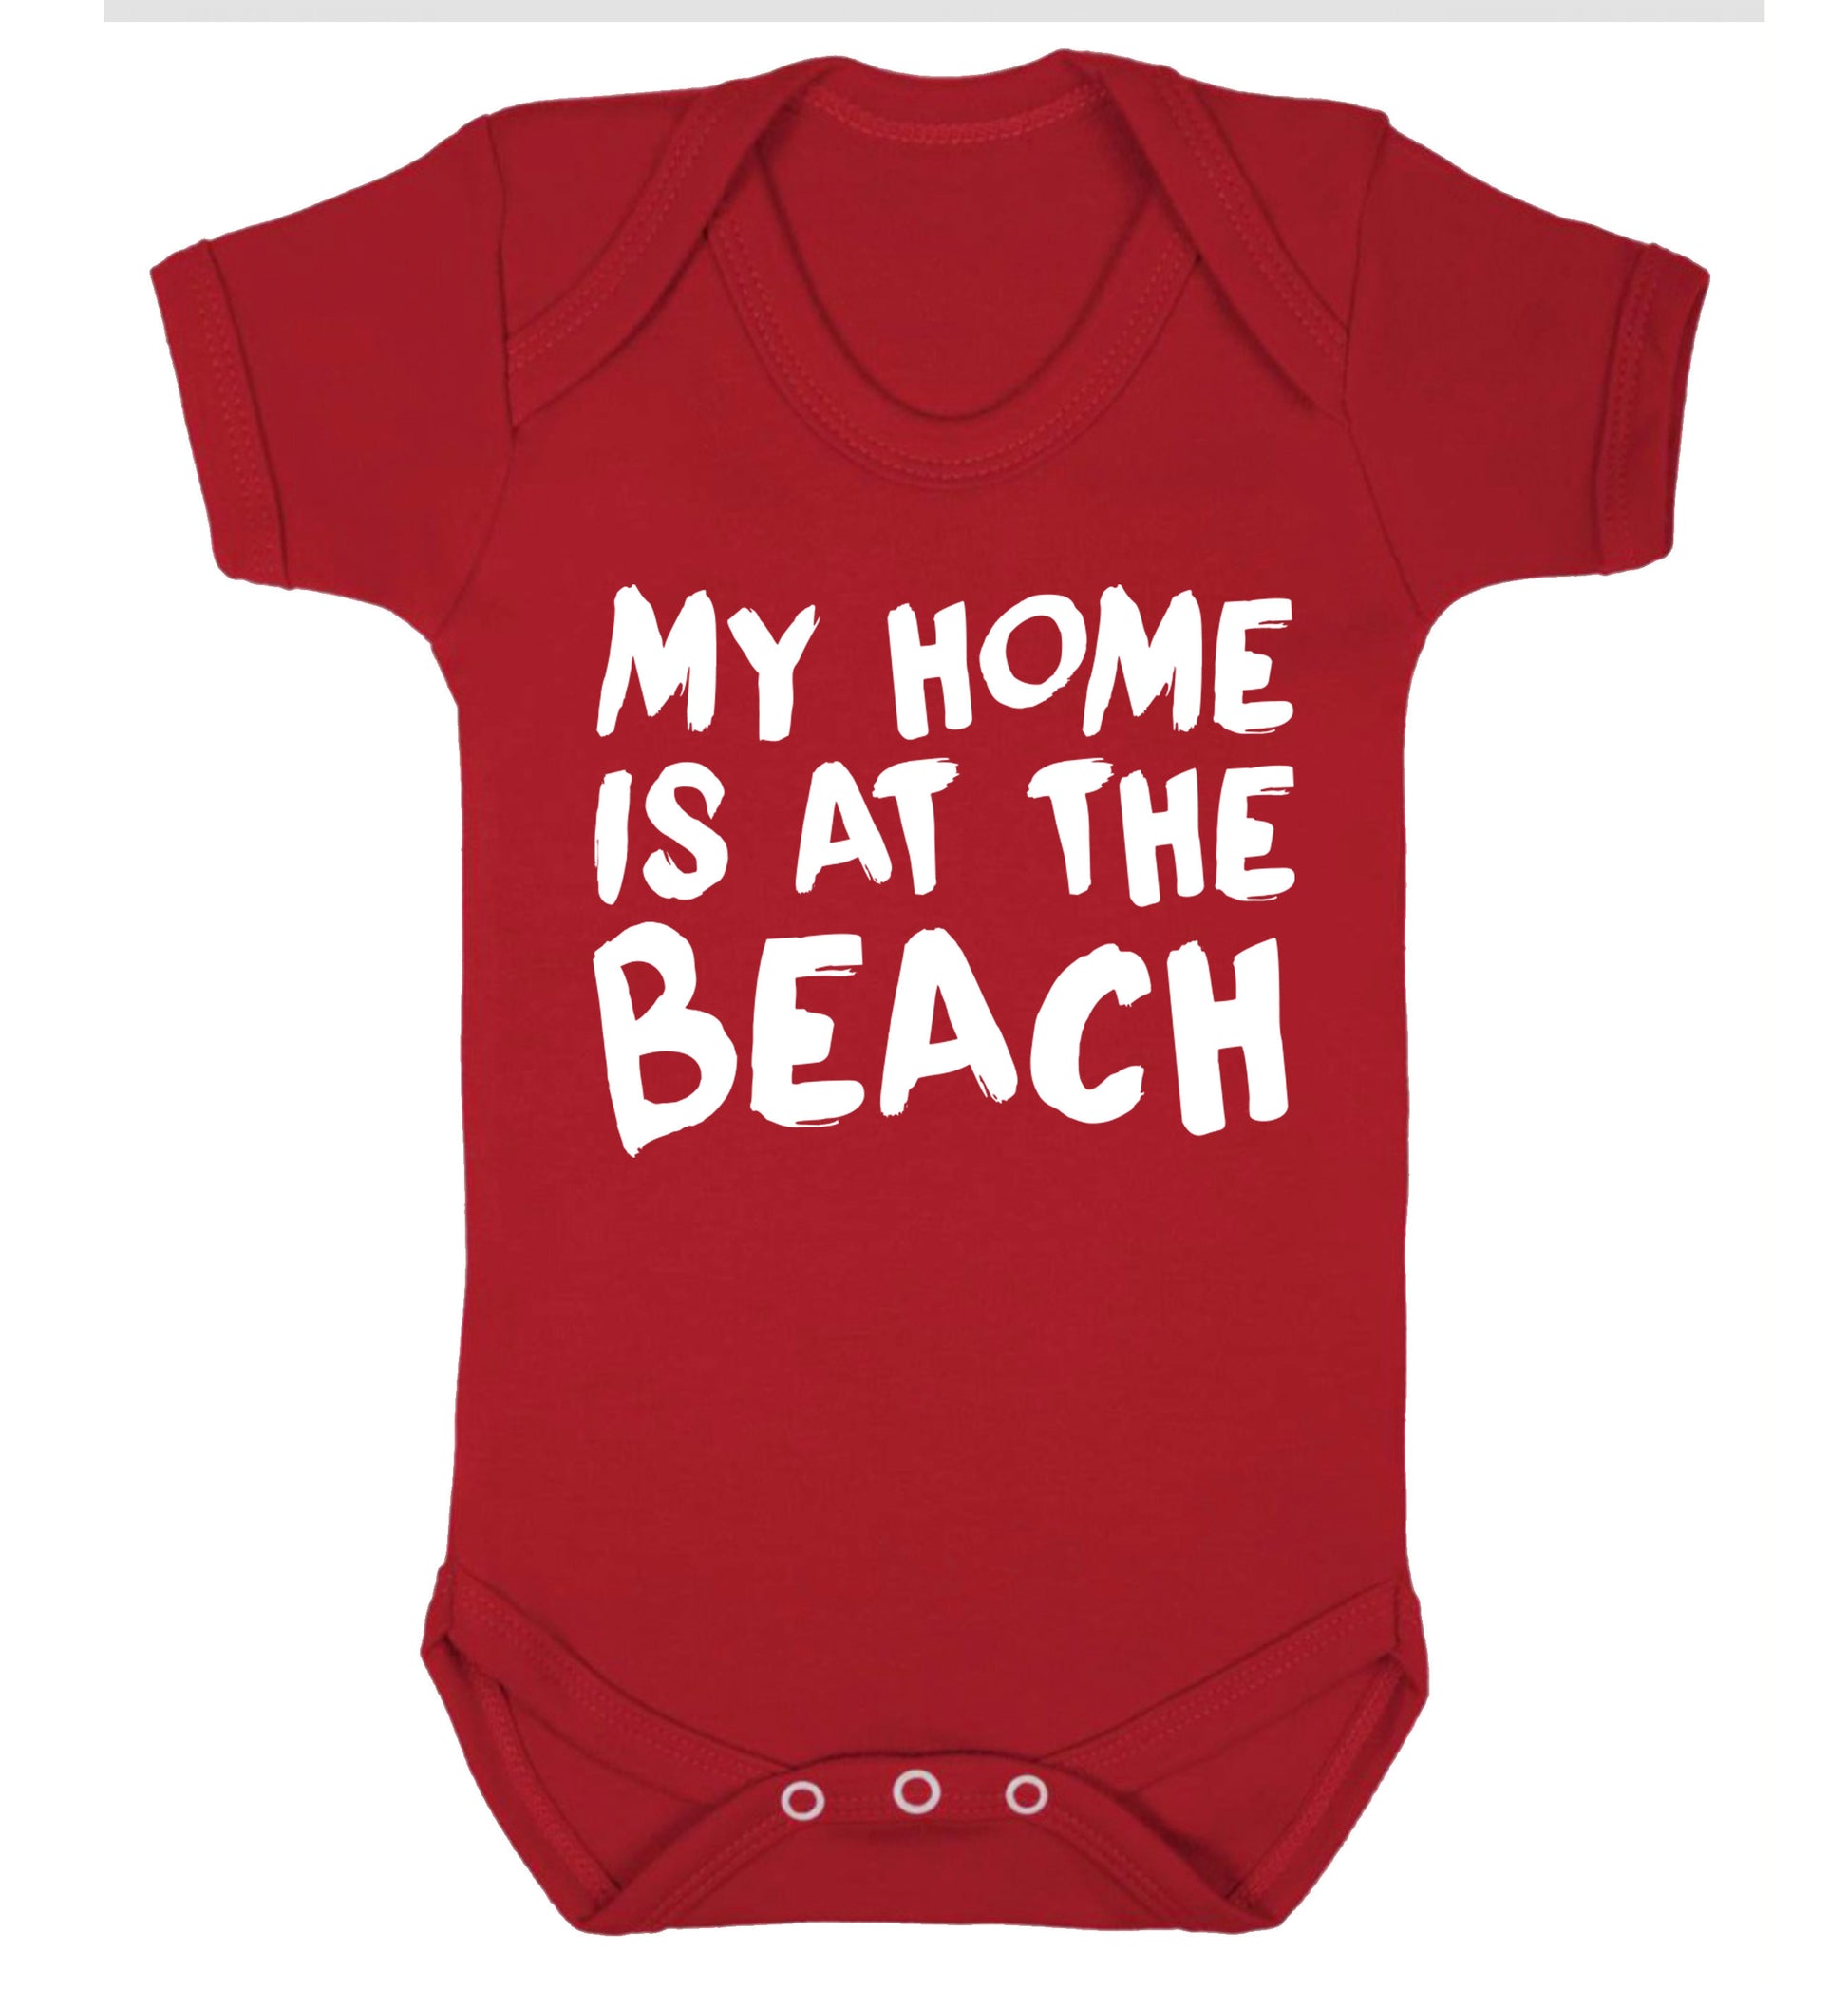 My home is at the beach Baby Vest red 18-24 months